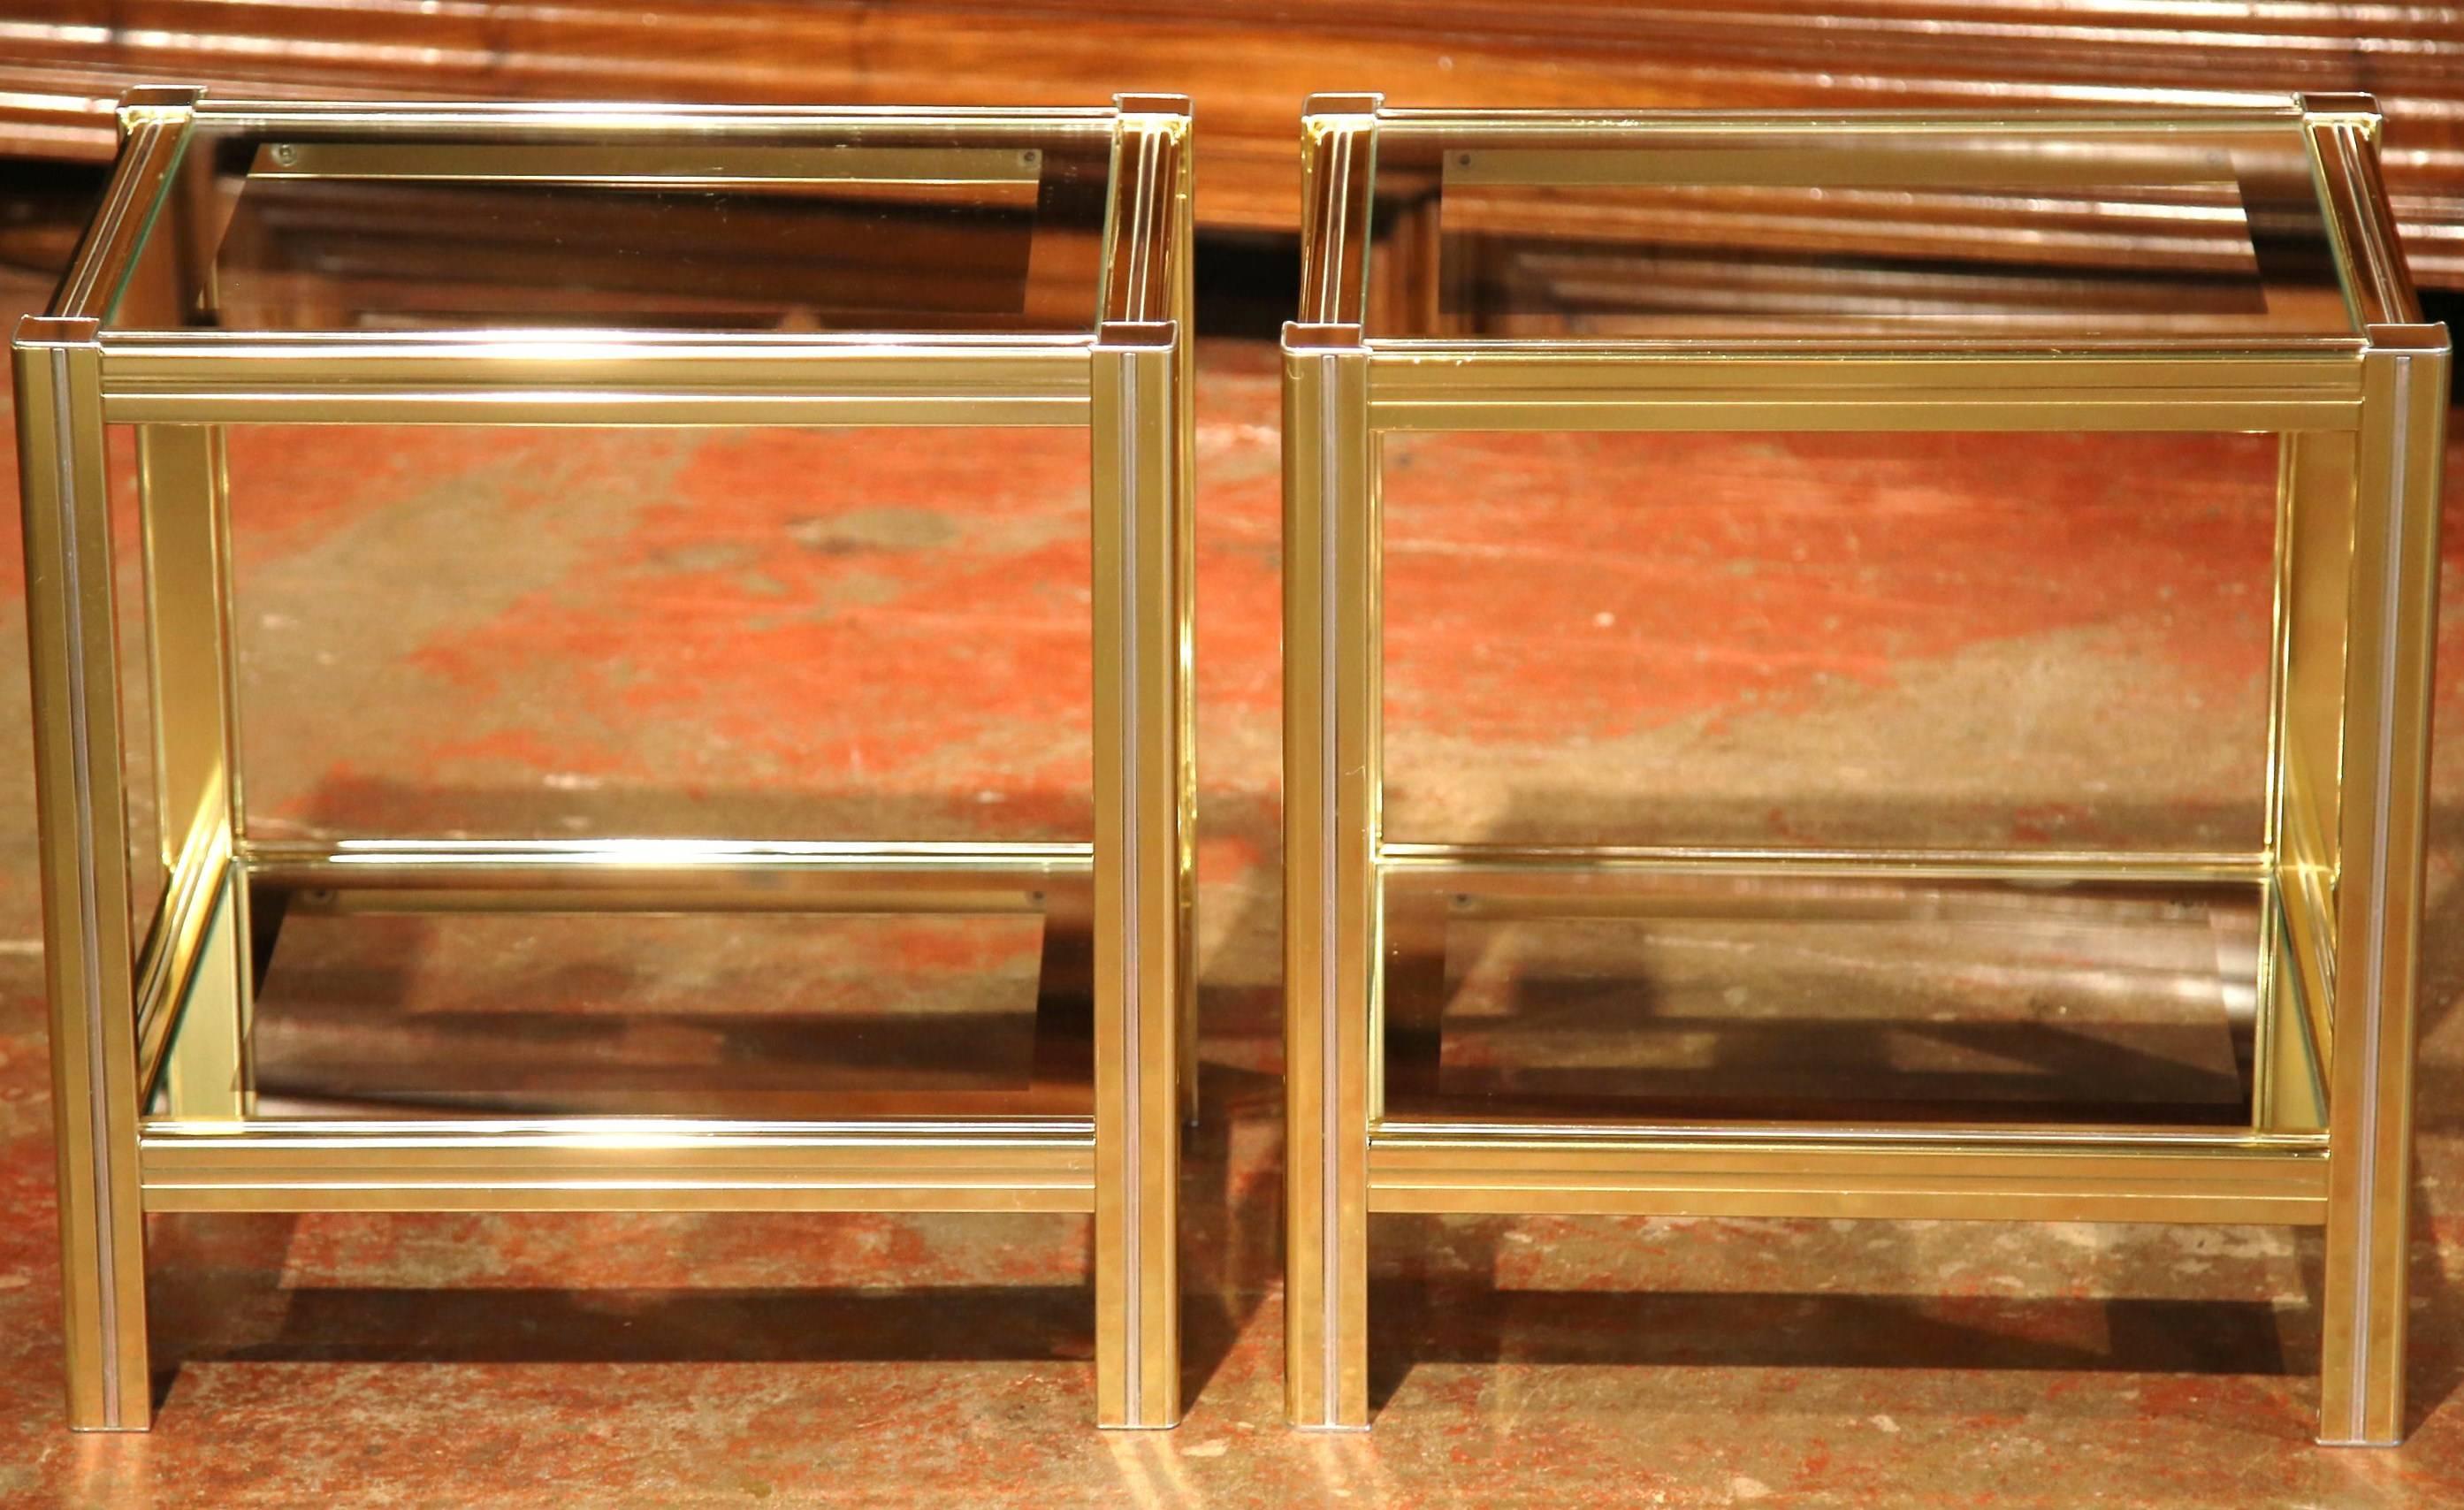 This elegant pair of vintage side tables was created in Paris, circa 1970. Each two-tier table has a chic, Minimalist style with square legs and a glass surface with gilt border on both top and bottom plateaux. The modern tables are in excellent